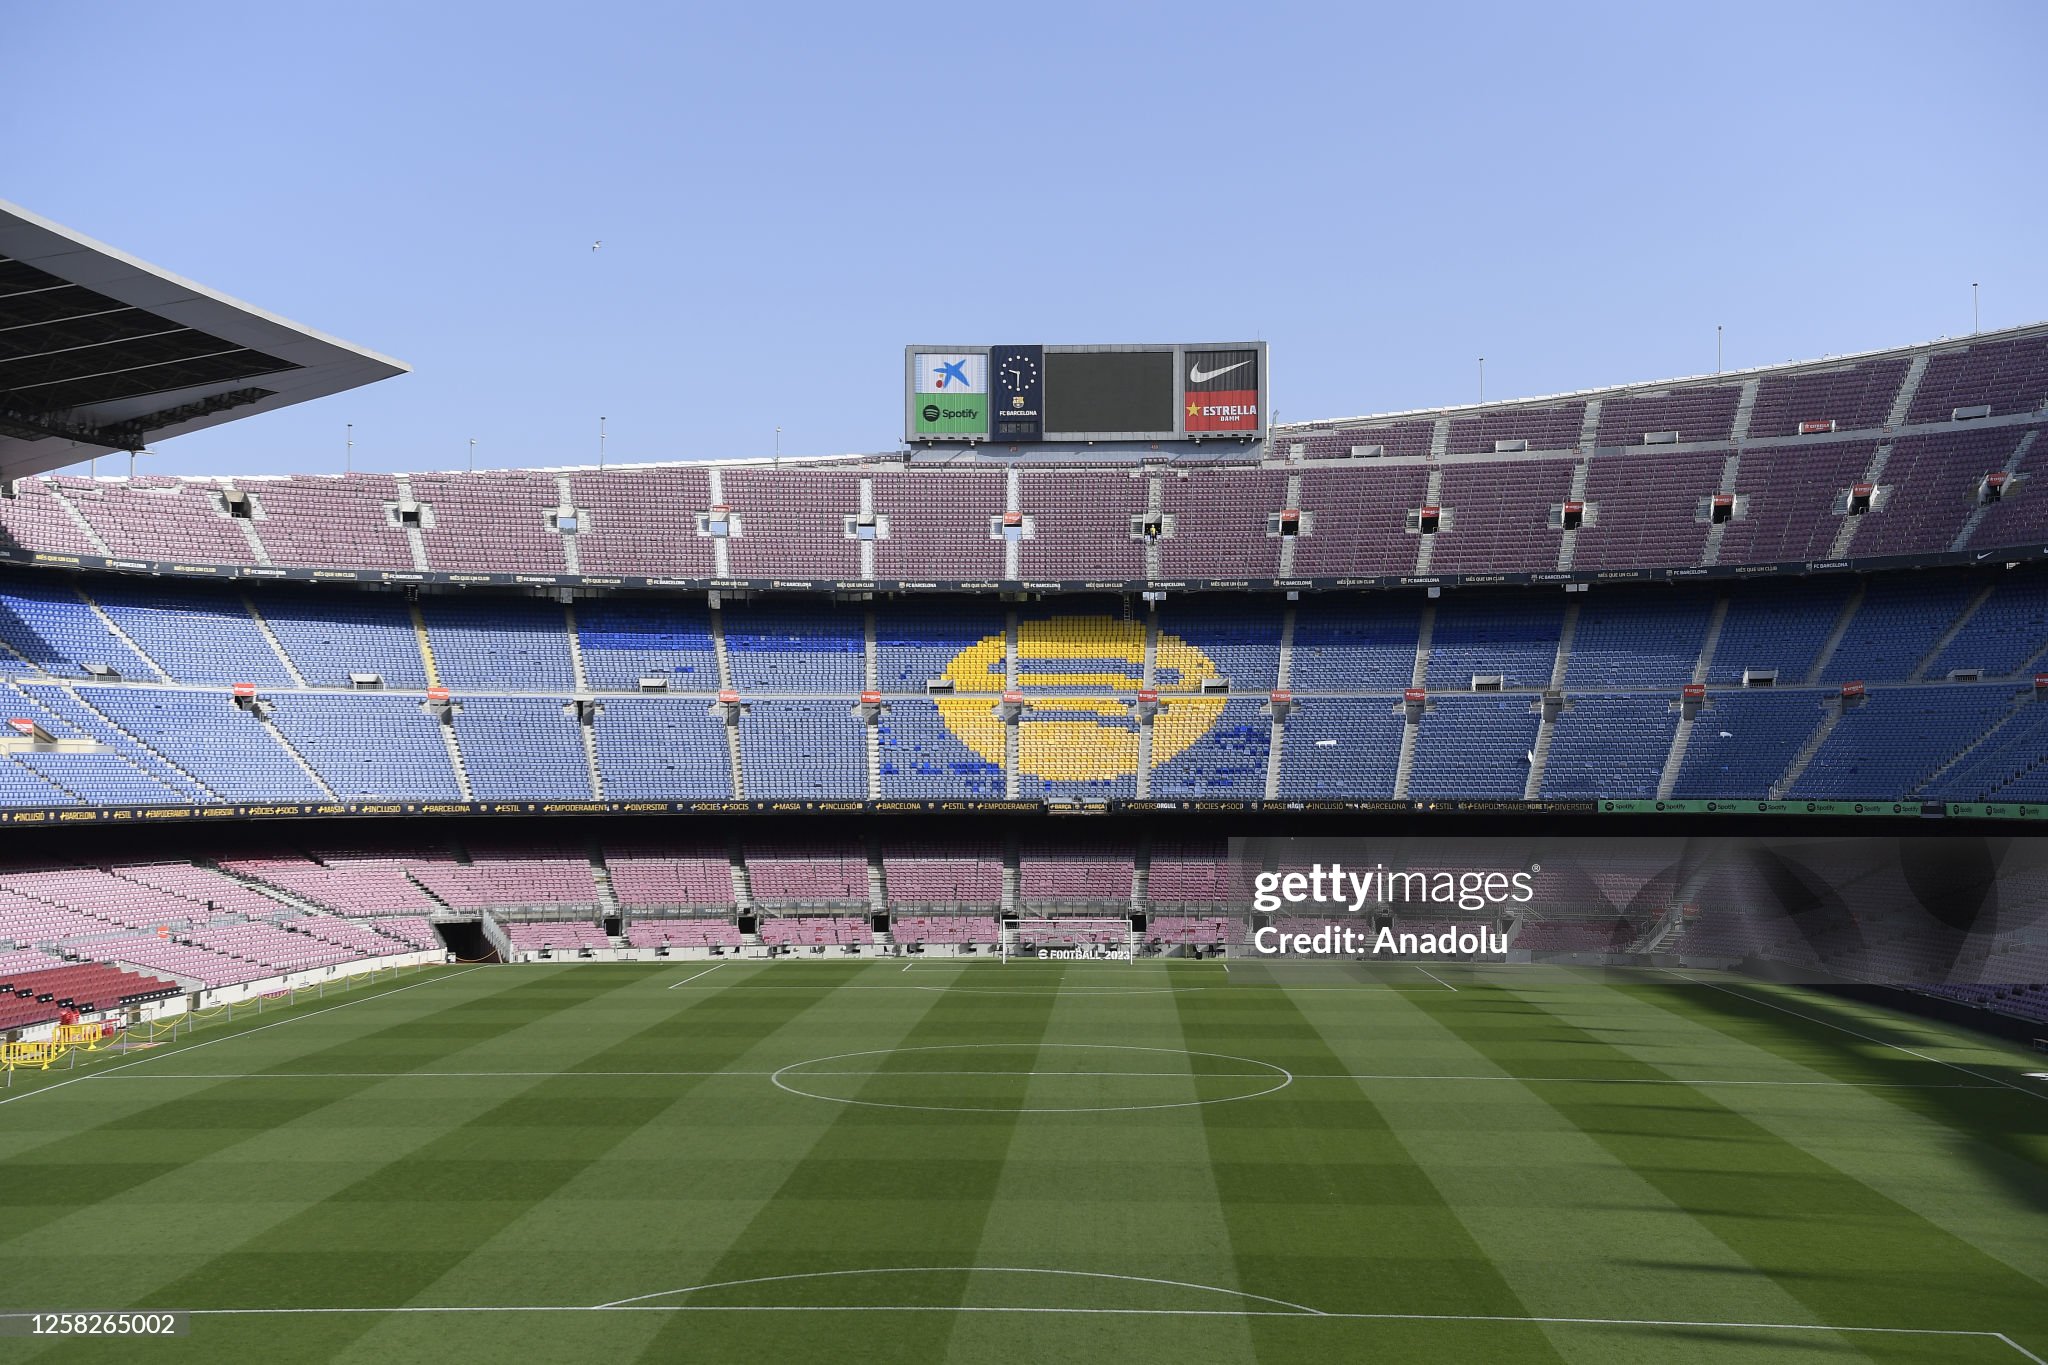 Investigative court conducts house search due to alleged bribery involving Barcelona